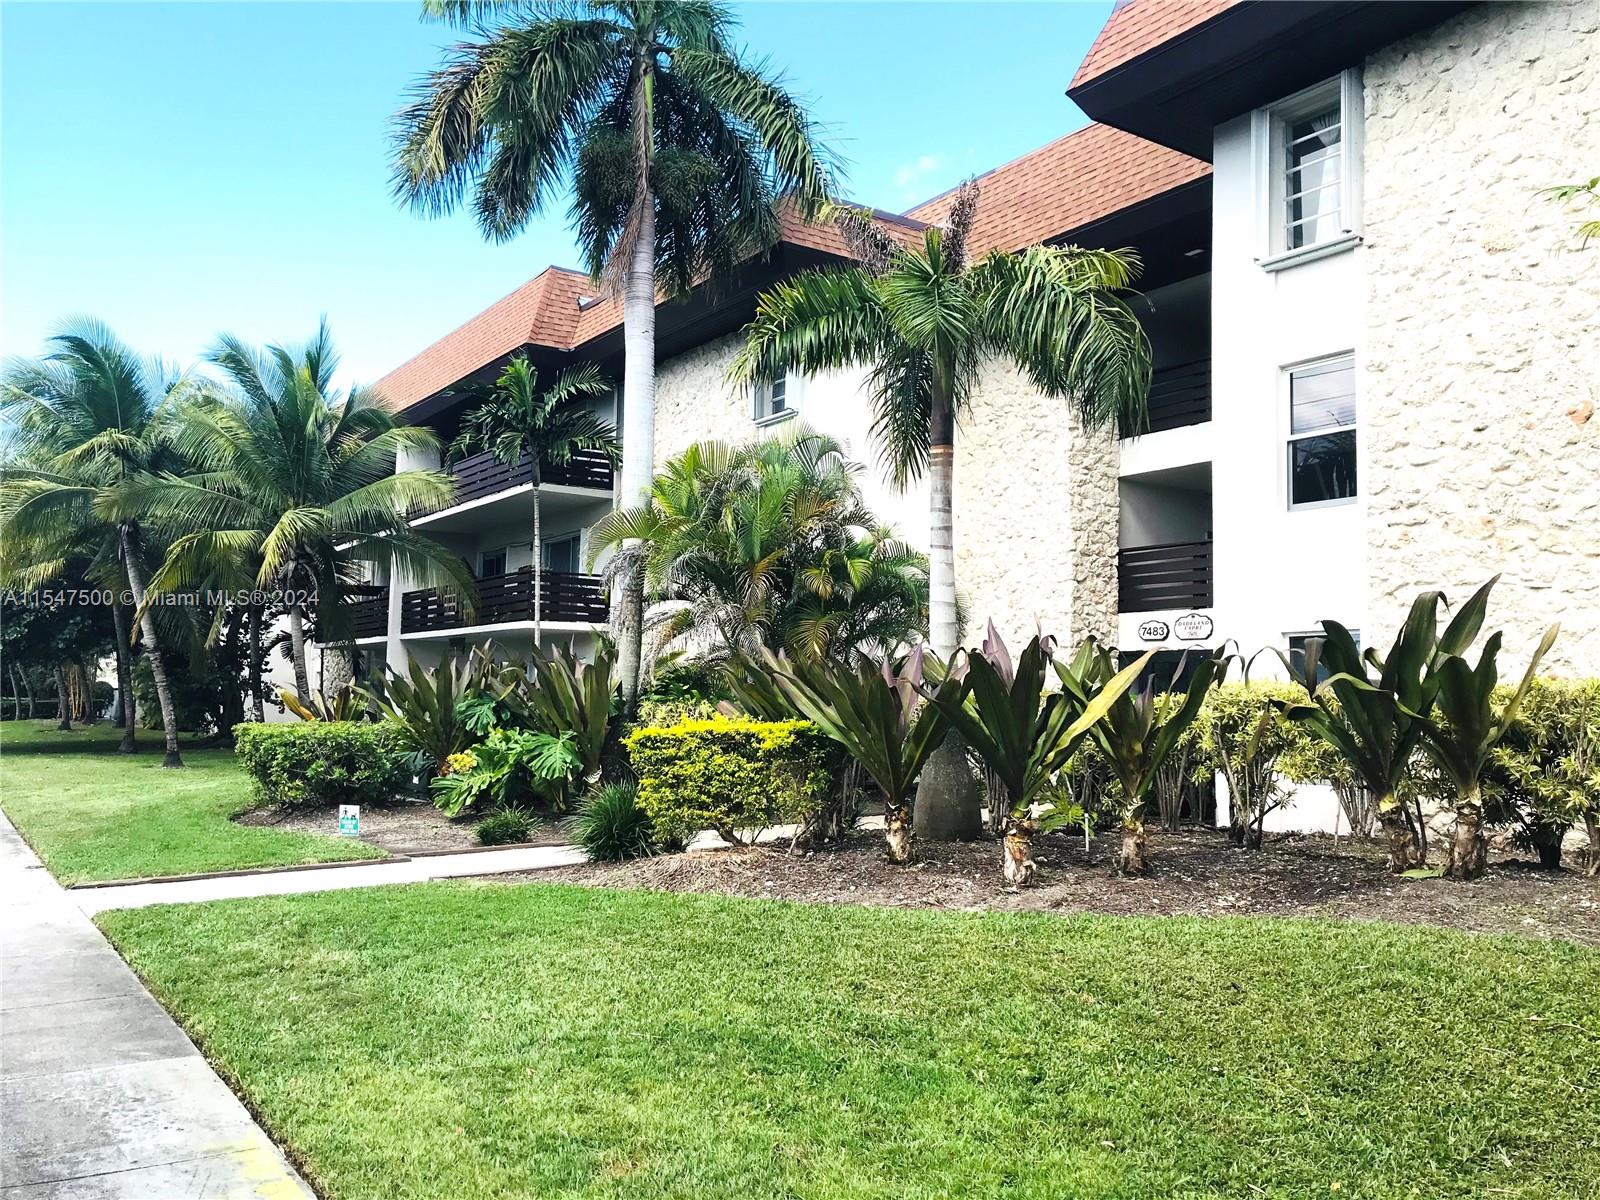 INVESTOR DREAM !!  DADELAND AREA... GROUND FLOOR APARTMENT... WASHER AND DRYER IN UNIT...  RENTED UNTIL MARCH 2025 ... GATED COMMUNITY ...SWIMMING POOL AND GYM...MANAGEMENT ON SITE...